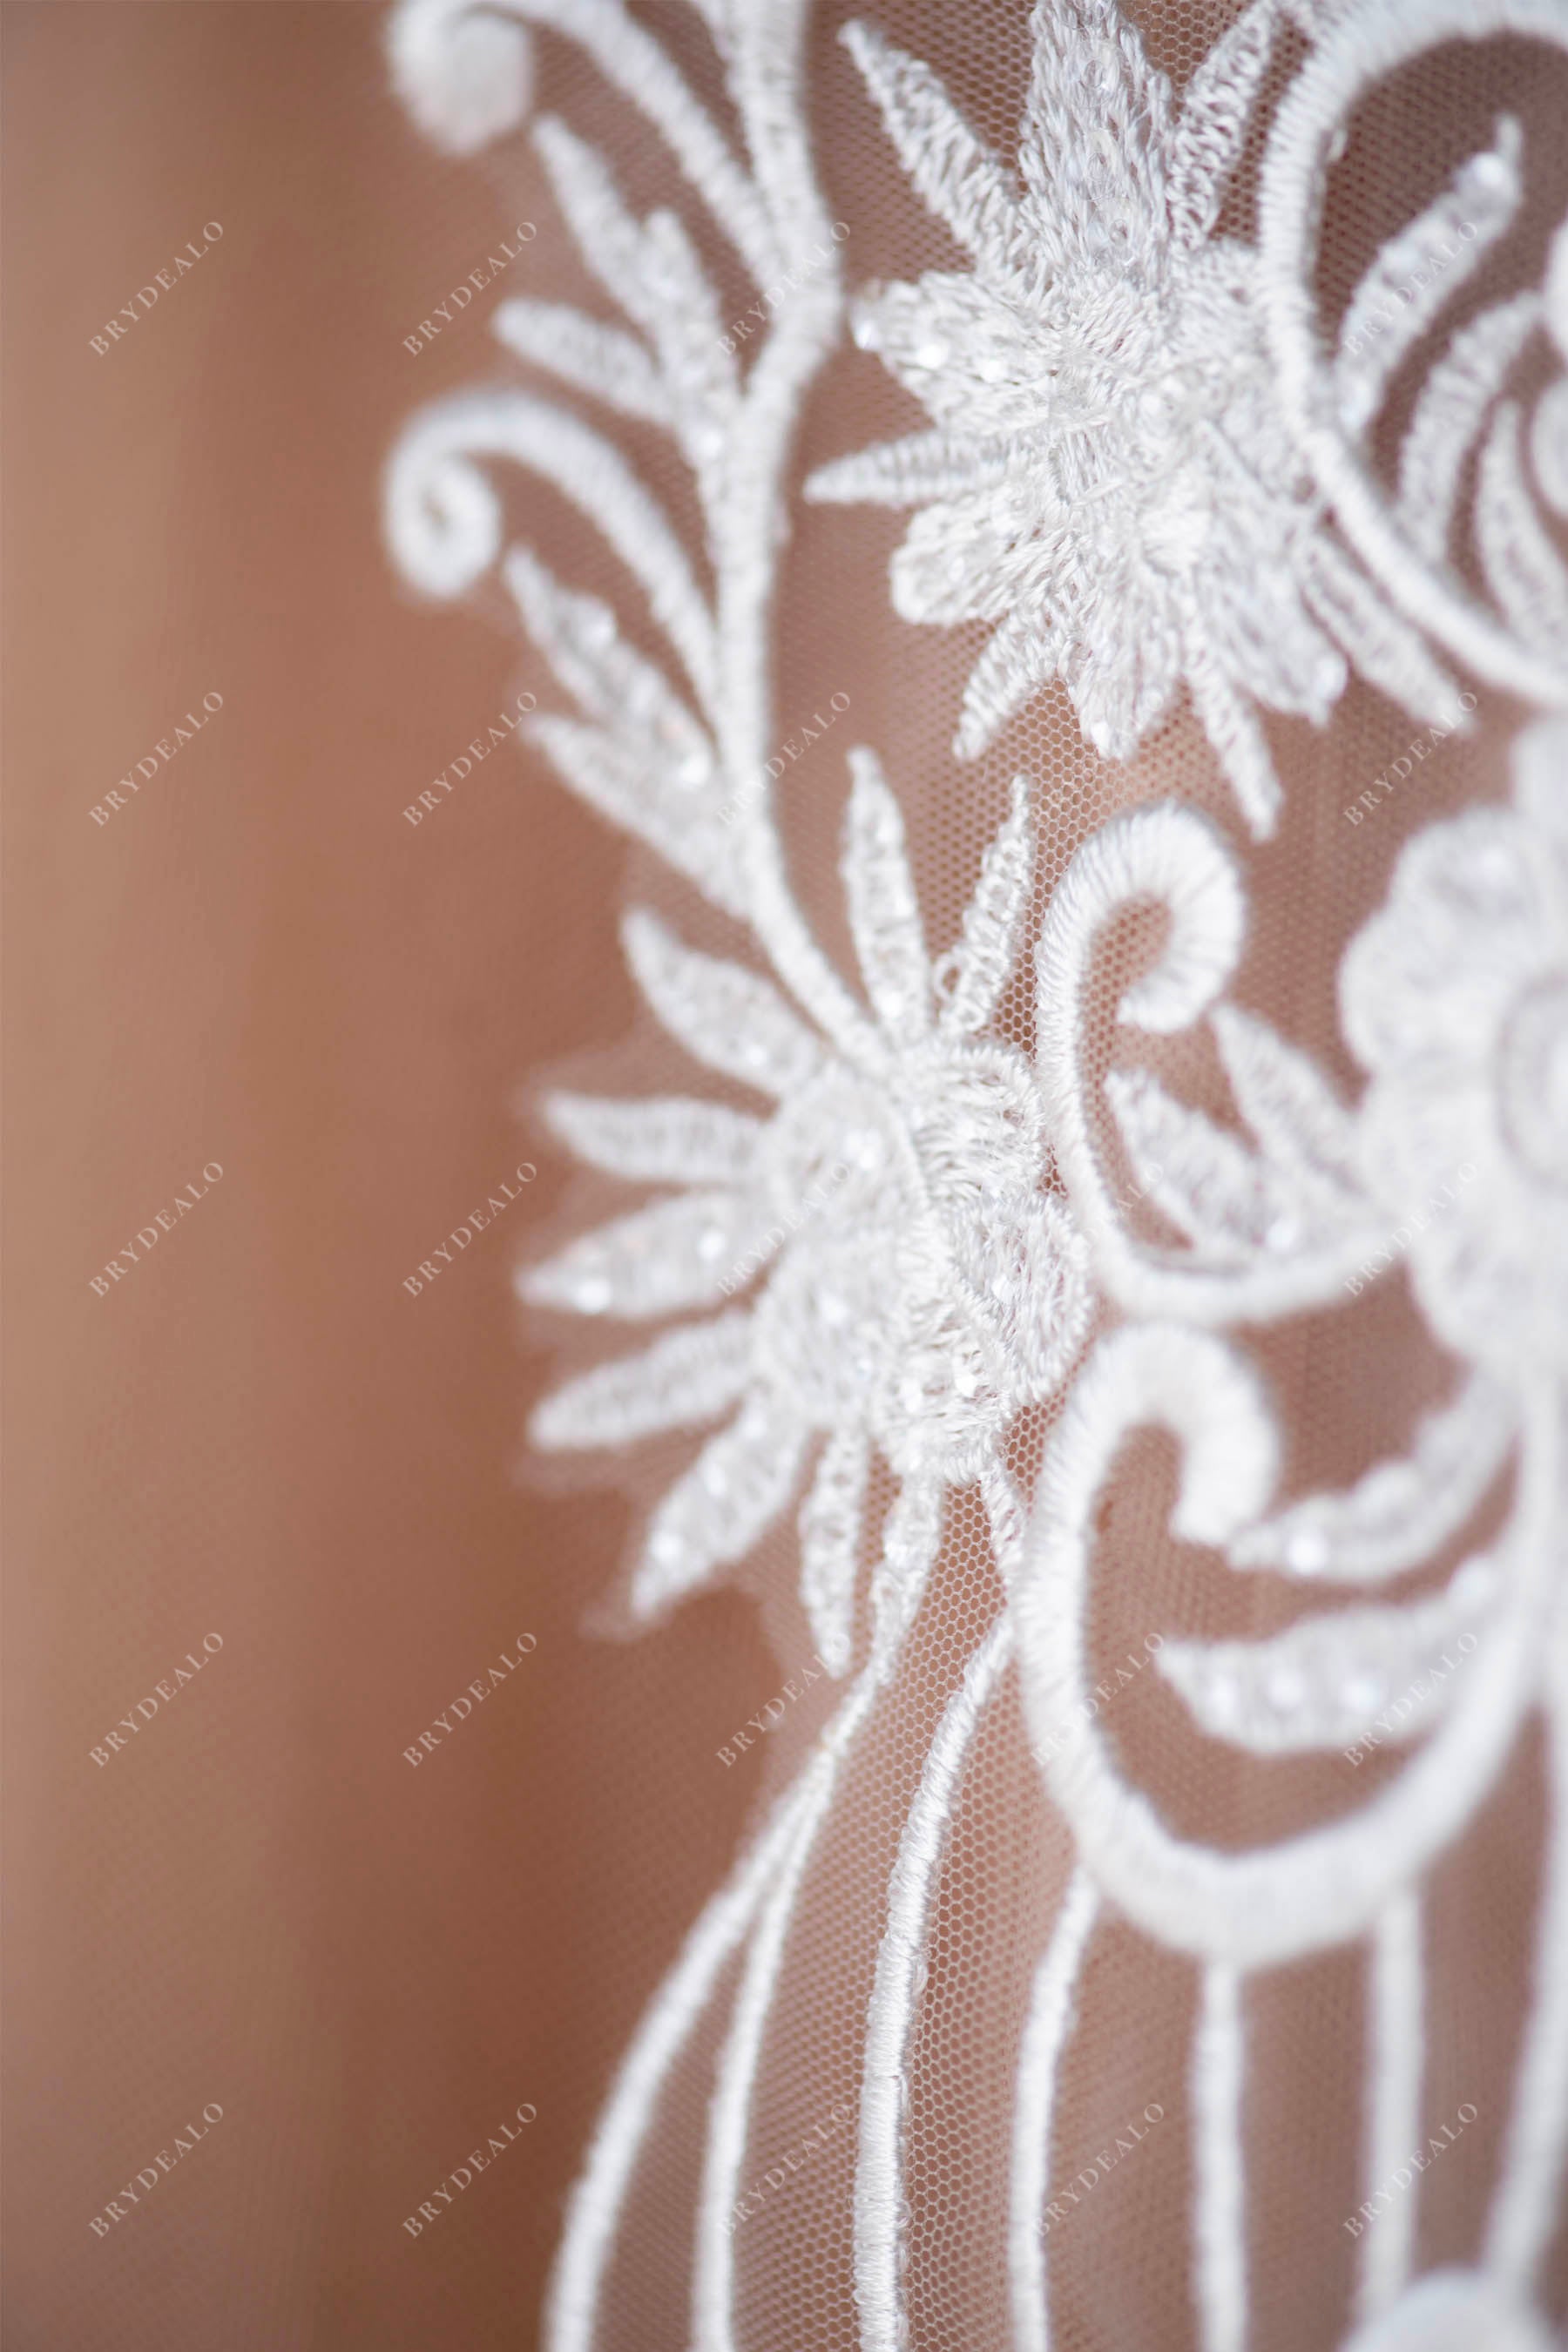 Shimmery Symmetric Embroidered Totem Motif Bridal Lace Applique